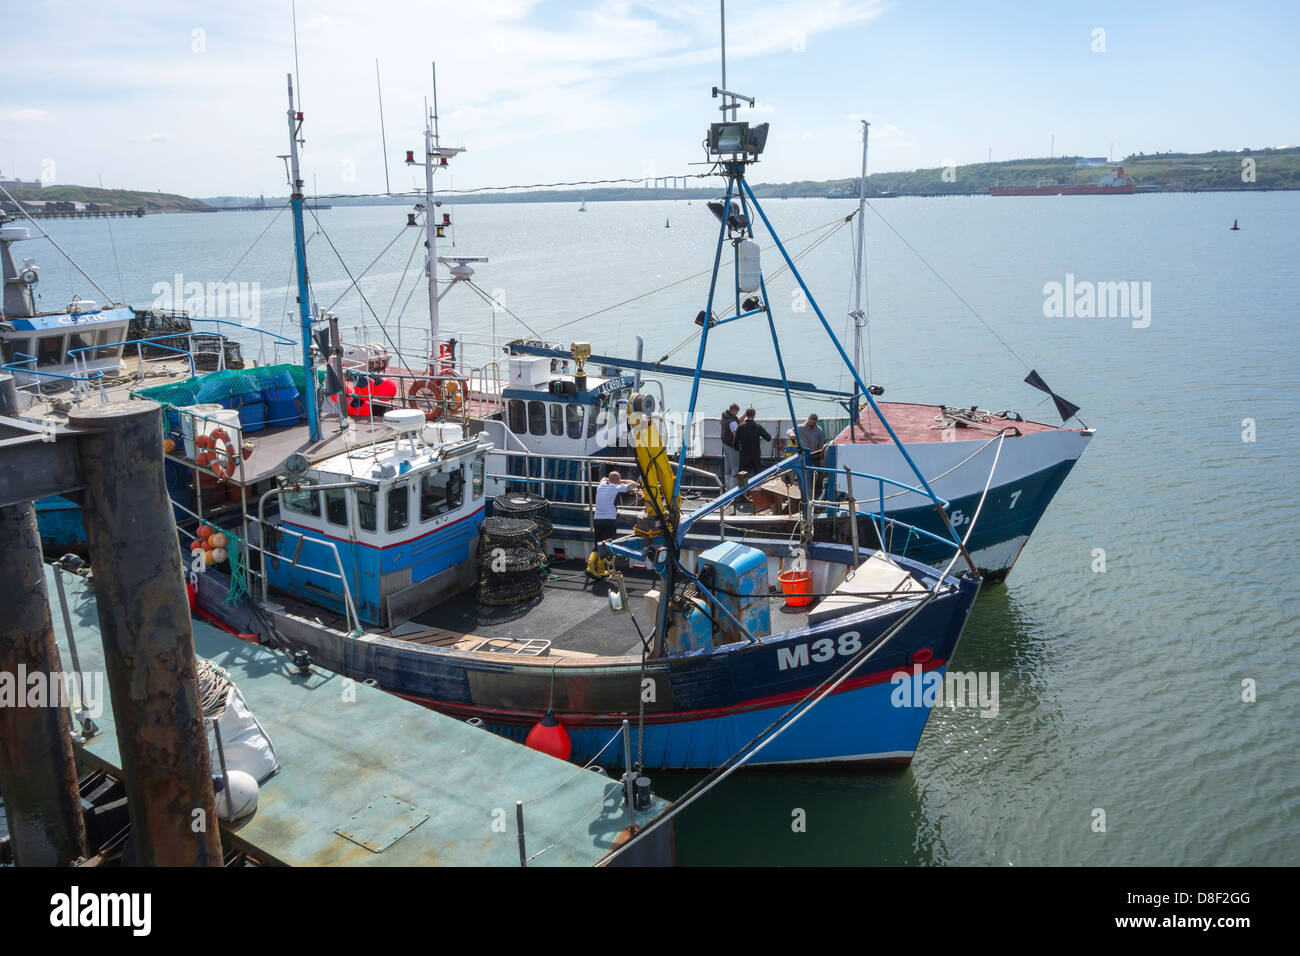 Fishing vessels moored outside the entrance to Milford Haven Port Stock Photo